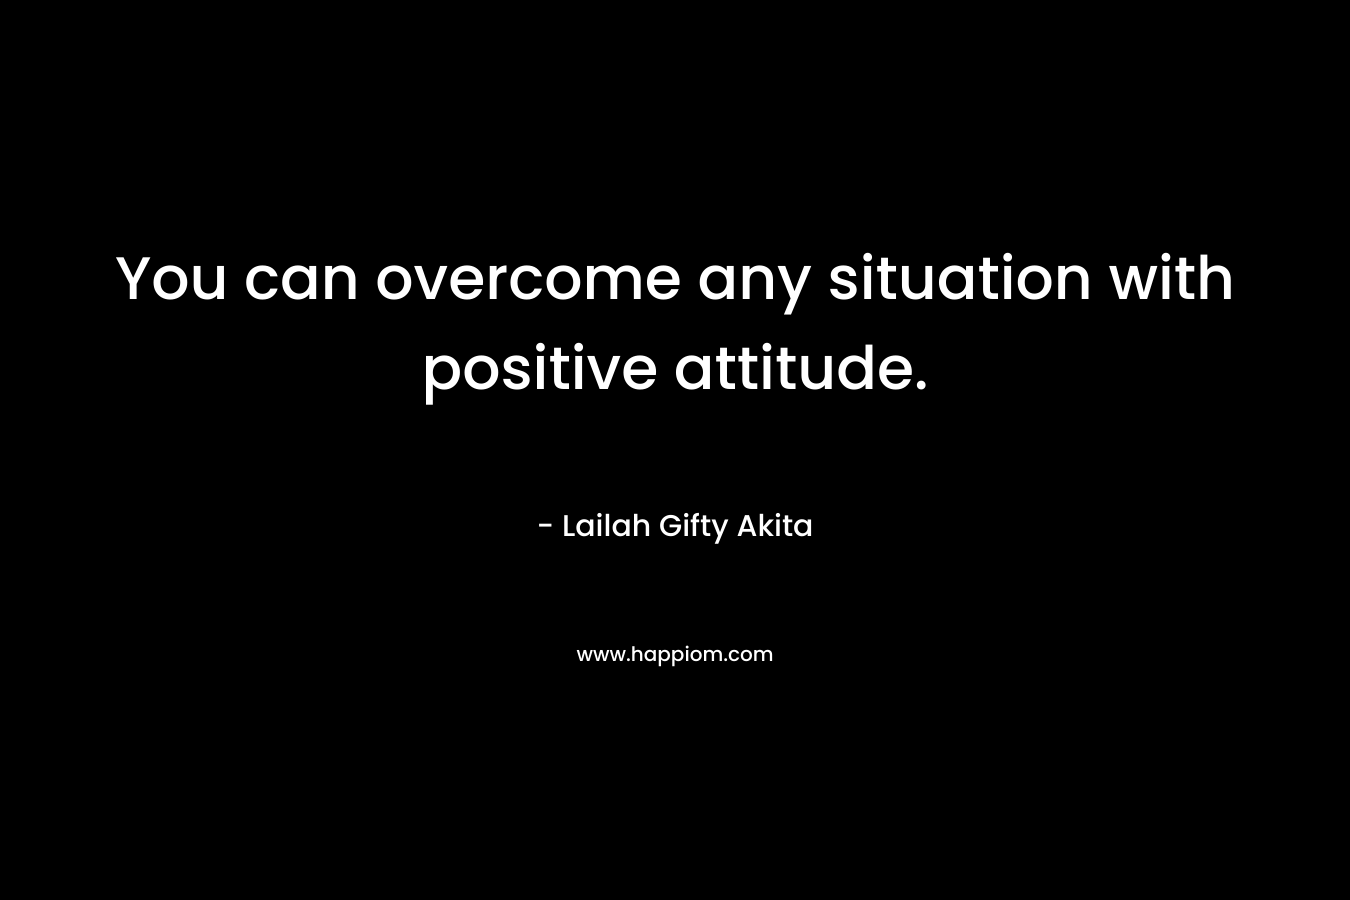 You can overcome any situation with positive attitude.